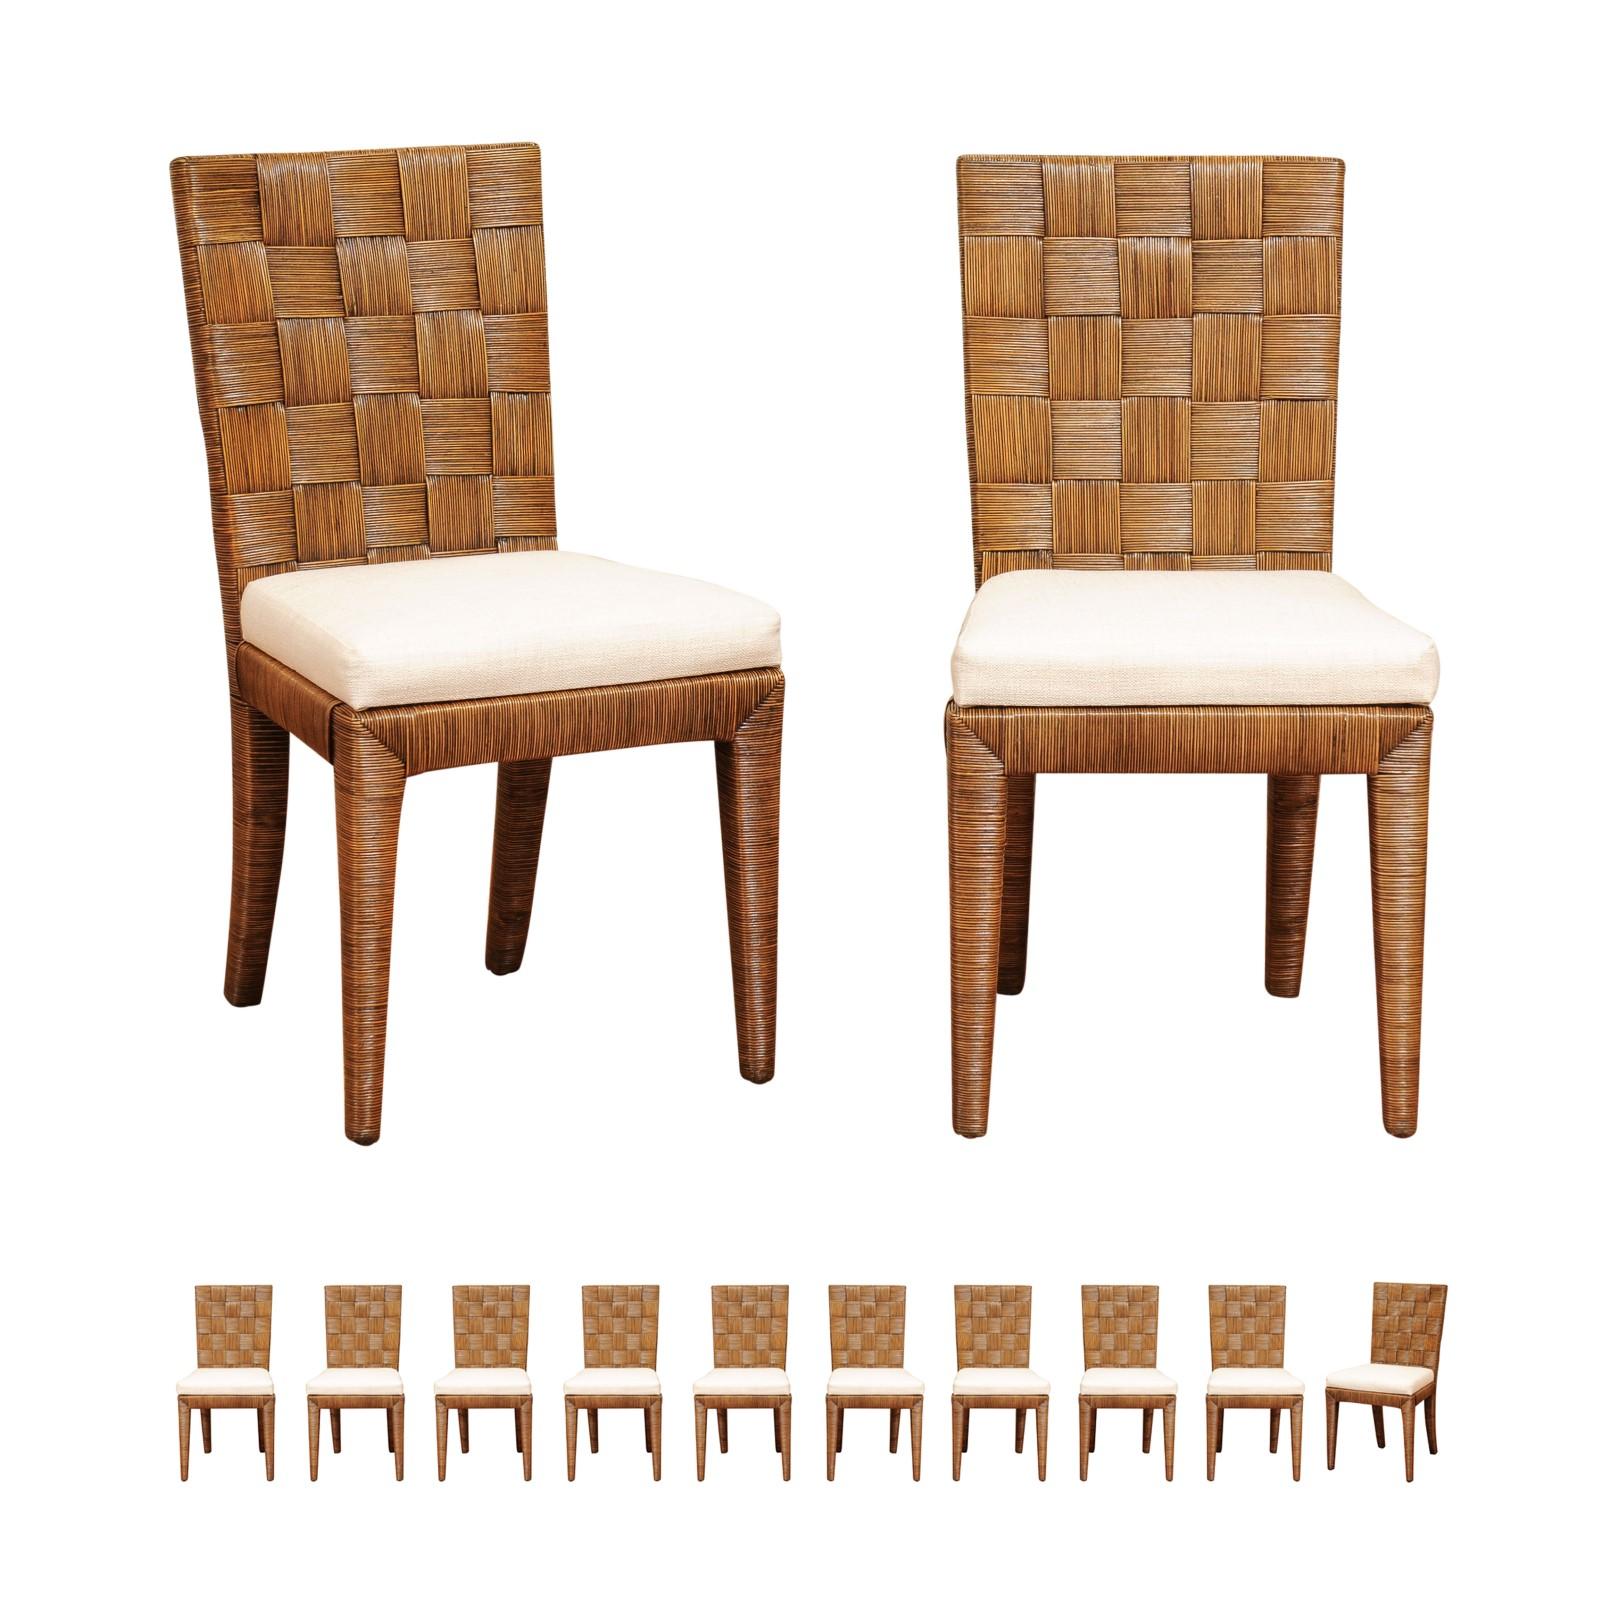 This magnificent large set of organic dining chairs is Unique on the World market. the set is shipped as professionally photographed and described in the listing narrative: Meticulously professionally restored, newly custom upholstered and